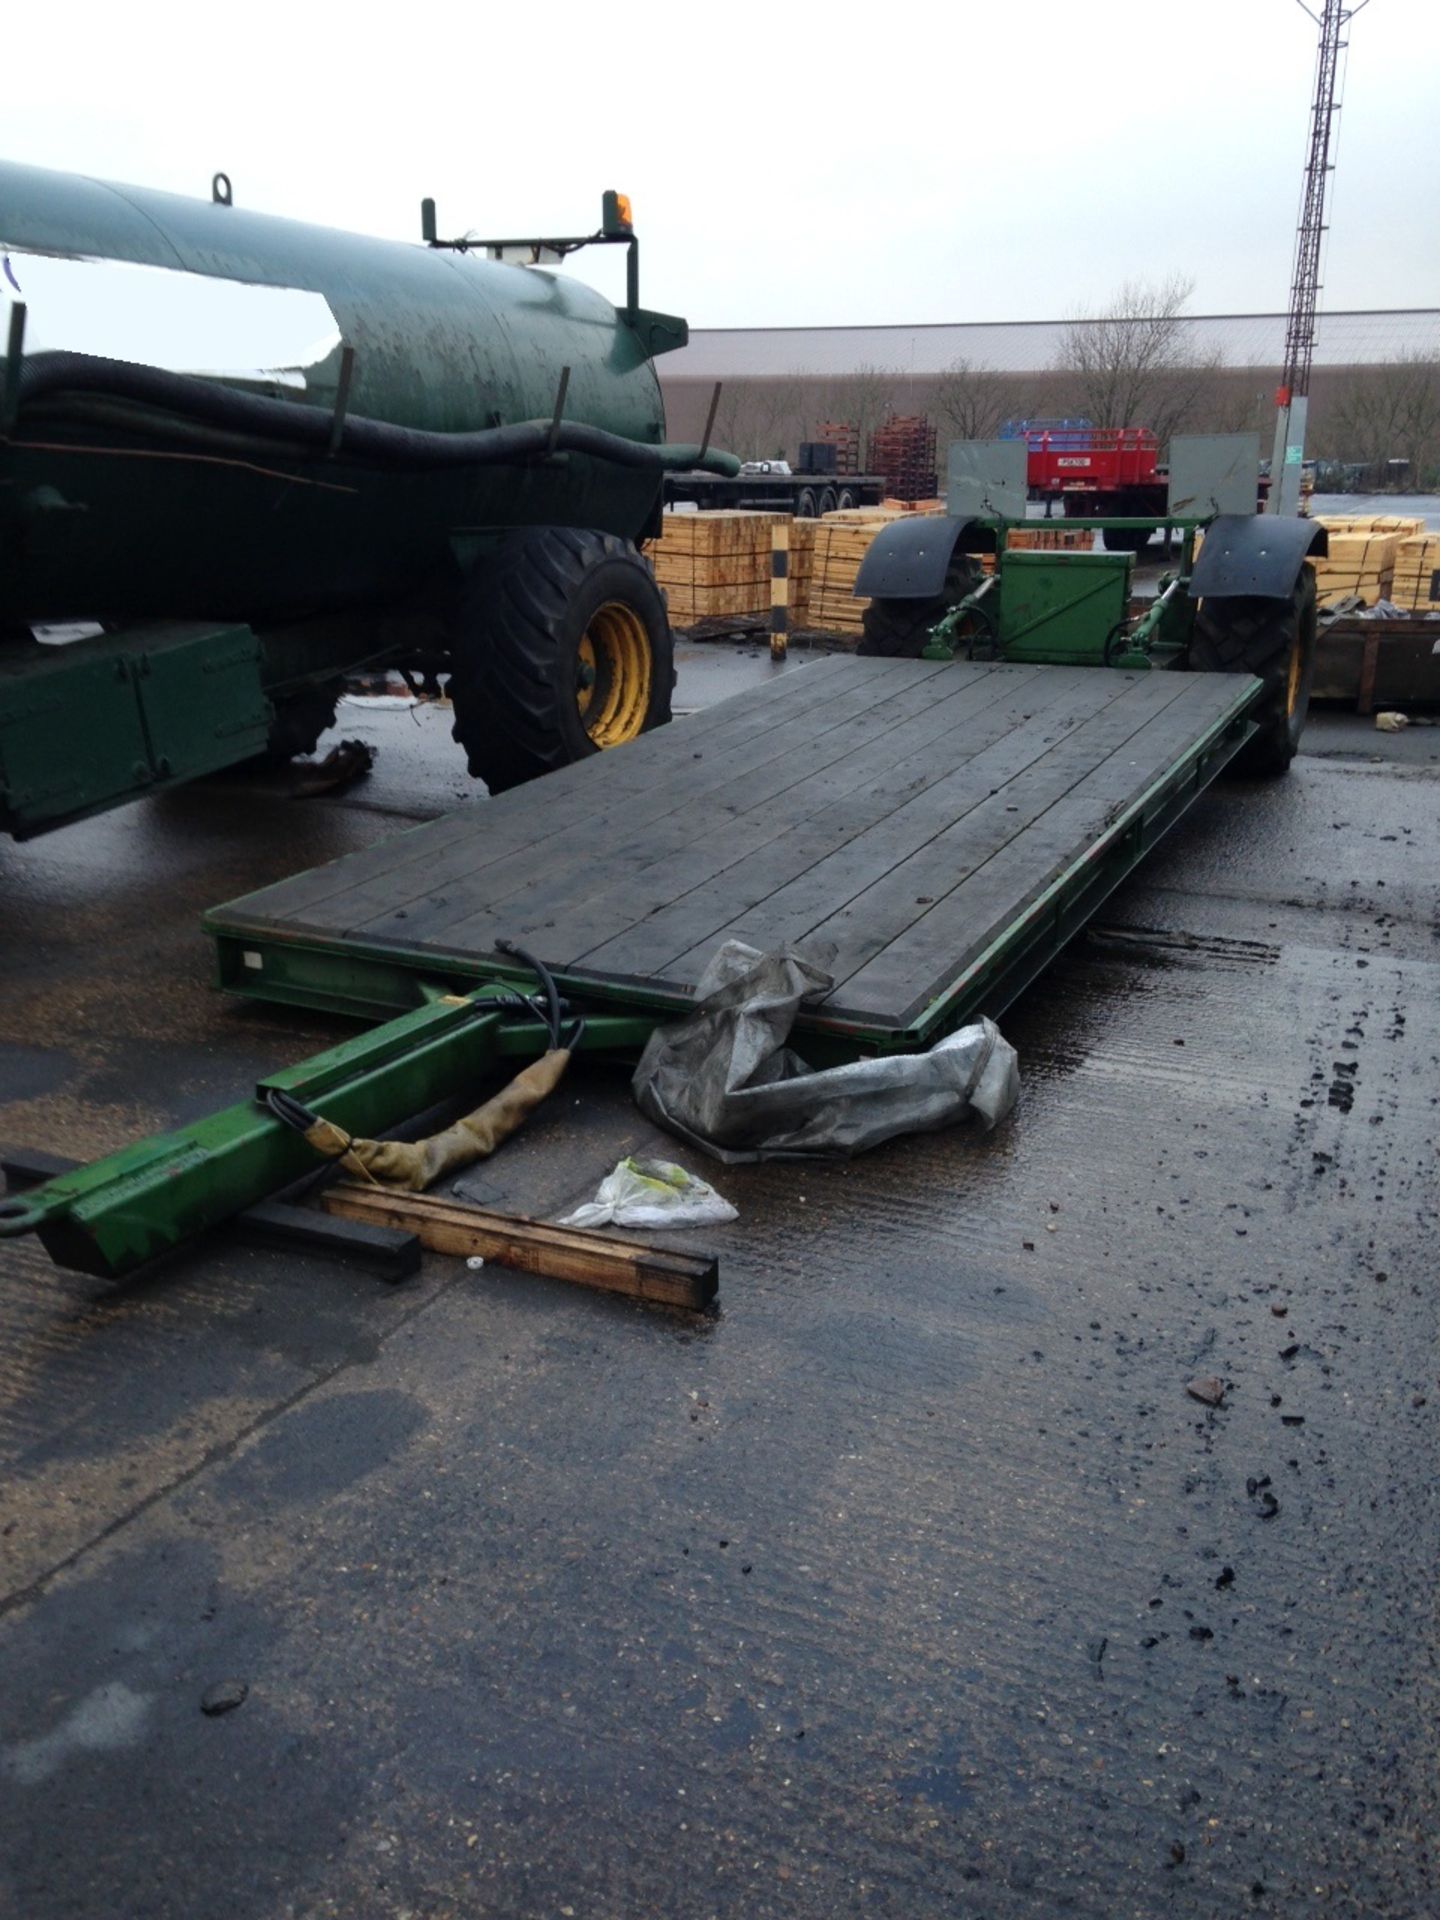 Low Loader Trailer
Good condition - Image 2 of 3